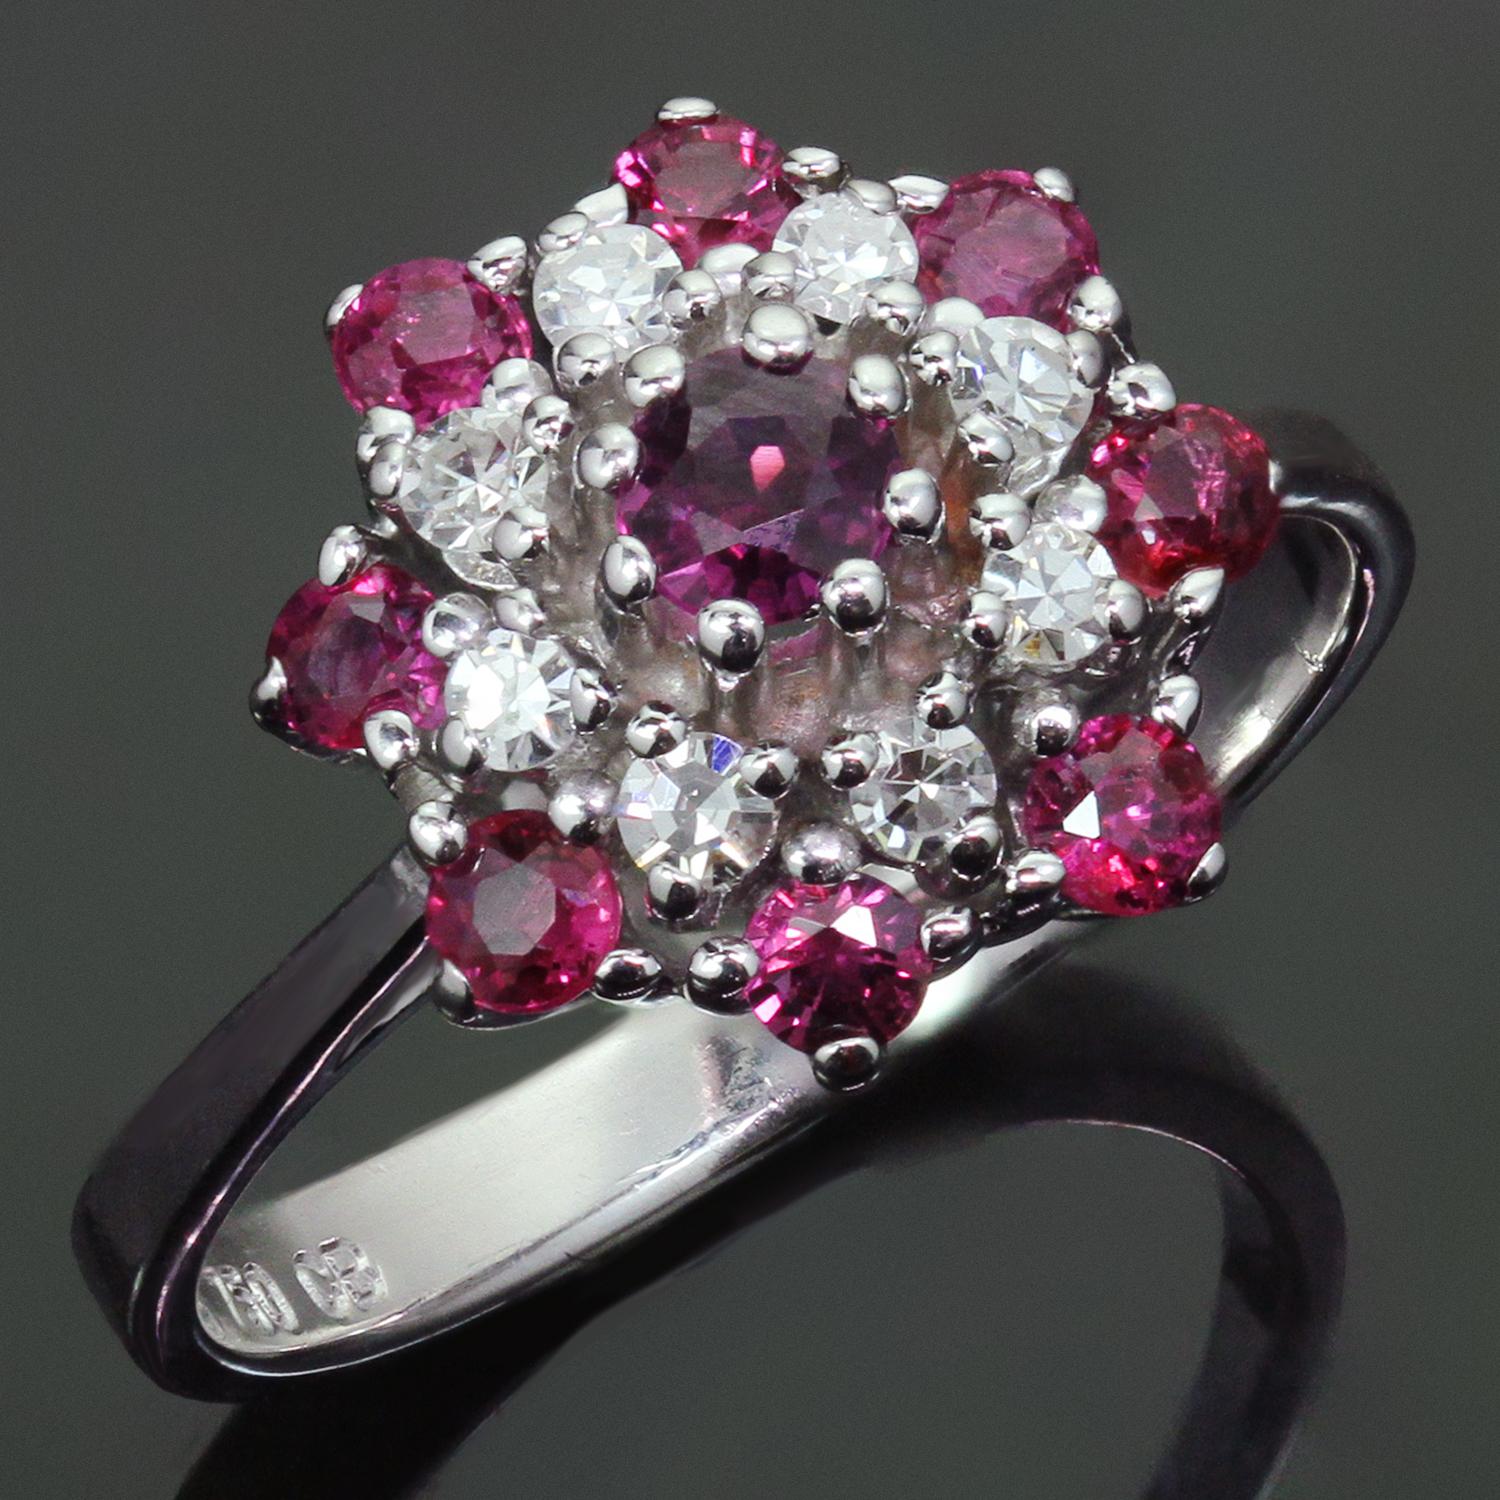 This fabulous vintage retro ring is crafted in 18k white gold and set with sparkling deep red round rubies and round brilliant G-H VS2-SI1 diamonds weighing an estimated 0.30 carats. Made in United States circa 1970s. Measurements: 0.47